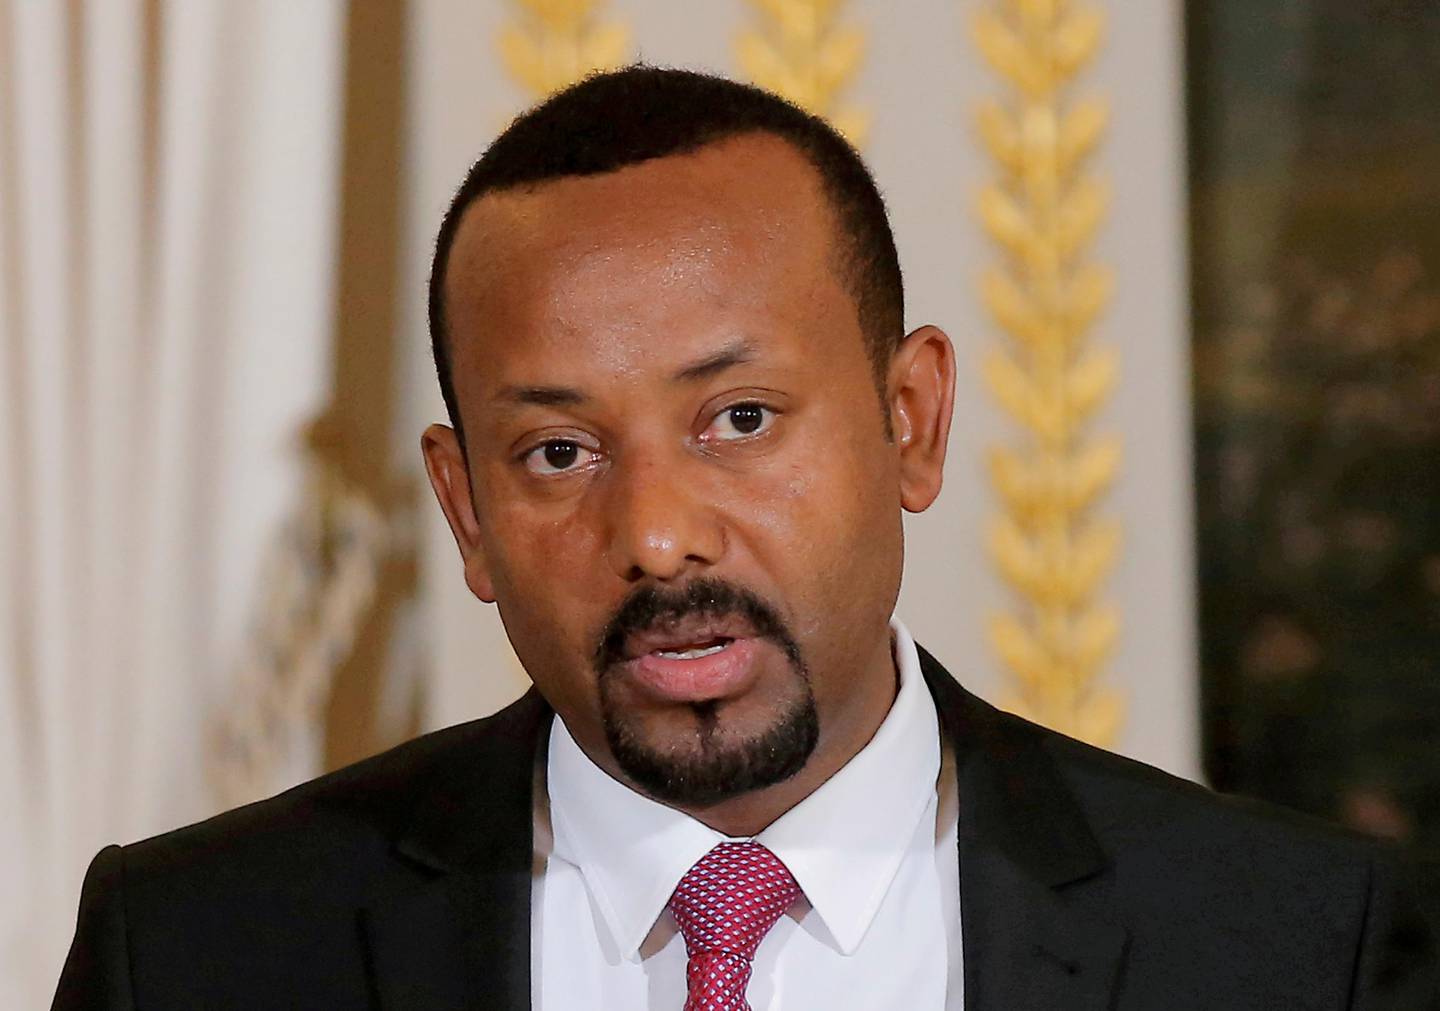 FILE PHOTO: FILE PHOTO: Ethiopian Prime Minister Abiy Ahmed speaks during a media conference at the Elysee Palace in Paris, France, October 29, 2018. Michel Euler/Pool via REUTERS/File Photo